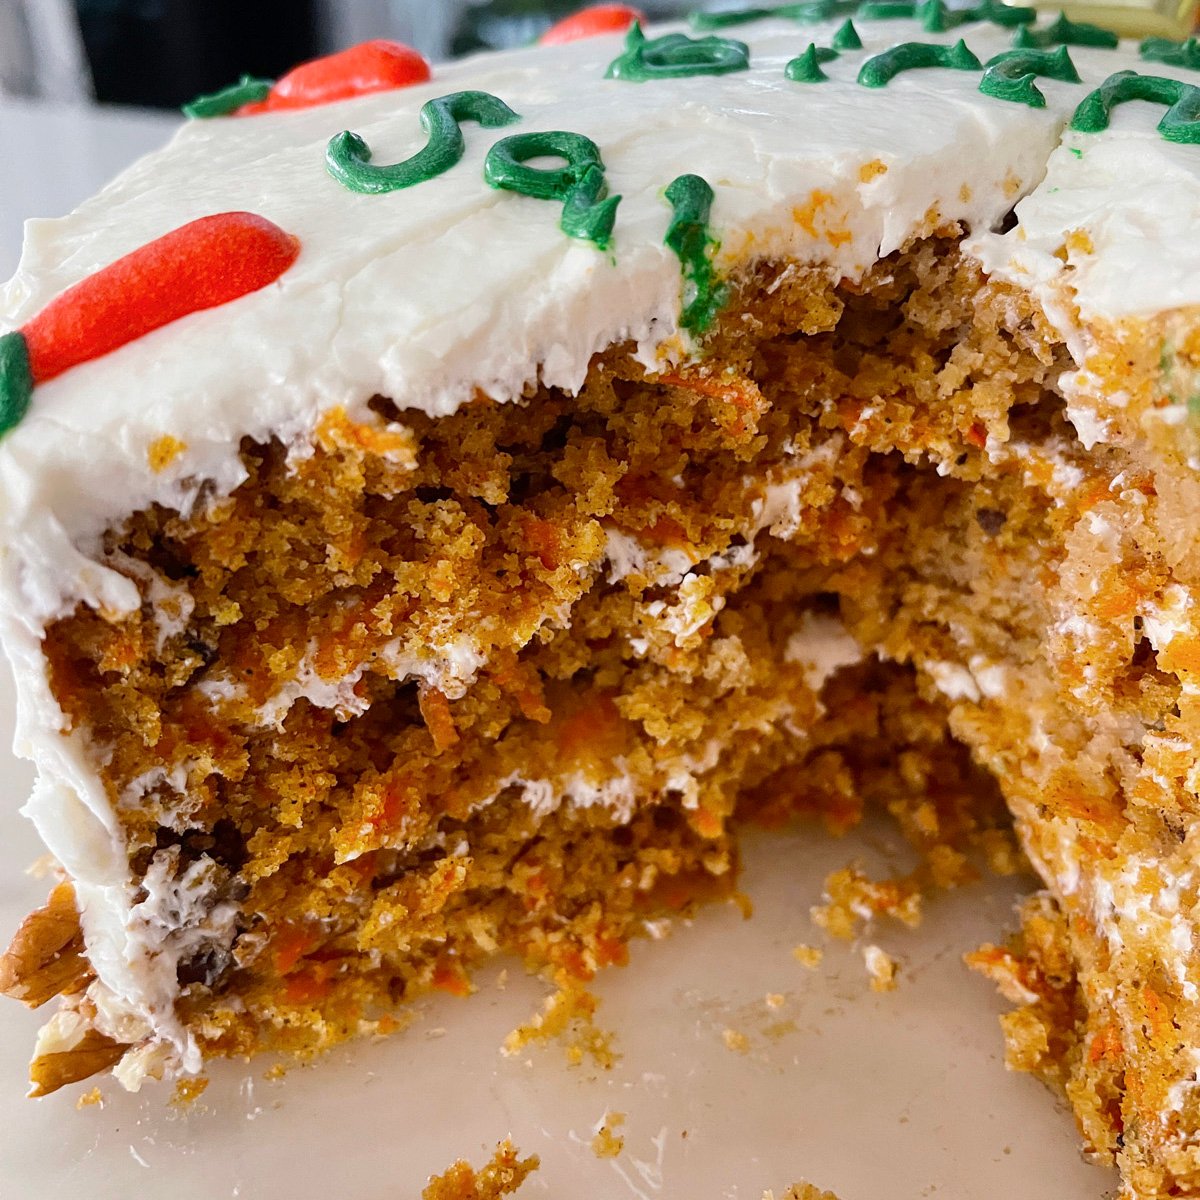 Three layer carrot cake with cream cheese frosting.